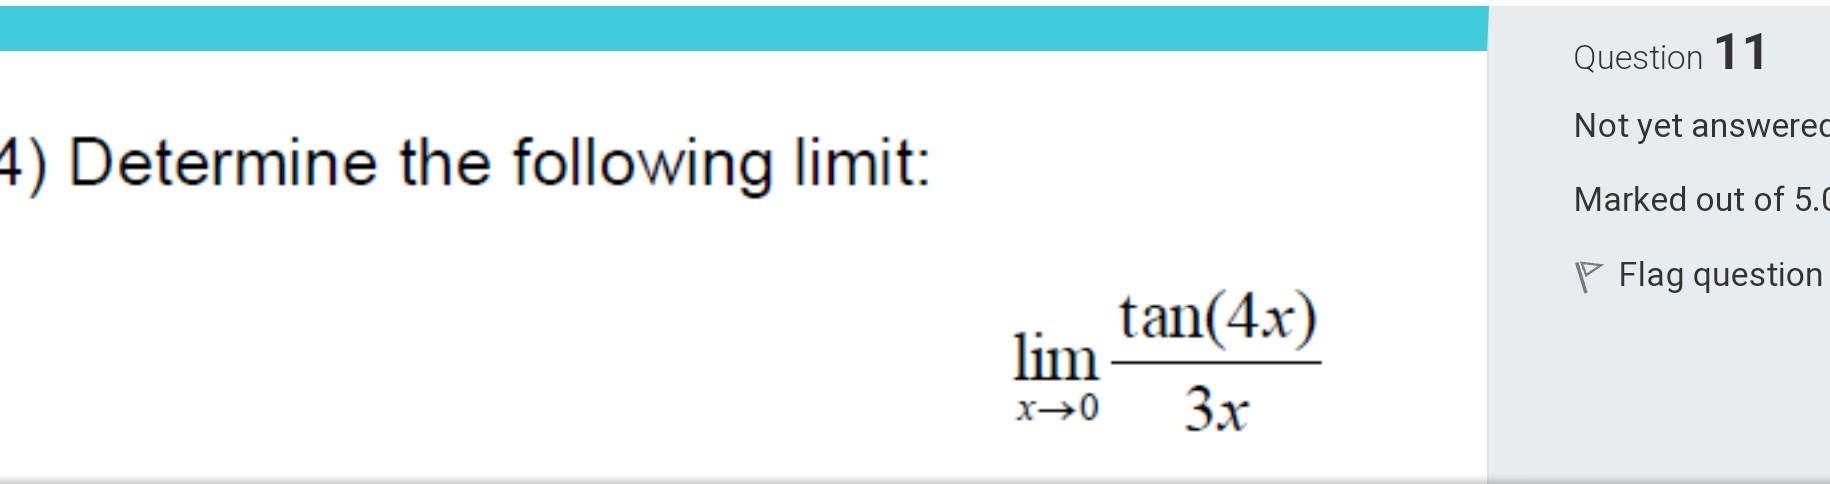 Question 11
) Determine the following limit:
Not yet answerec
Marked out of 5 .
\[
\lim _{x \rightarrow 0} \frac{\tan (4 x)}{